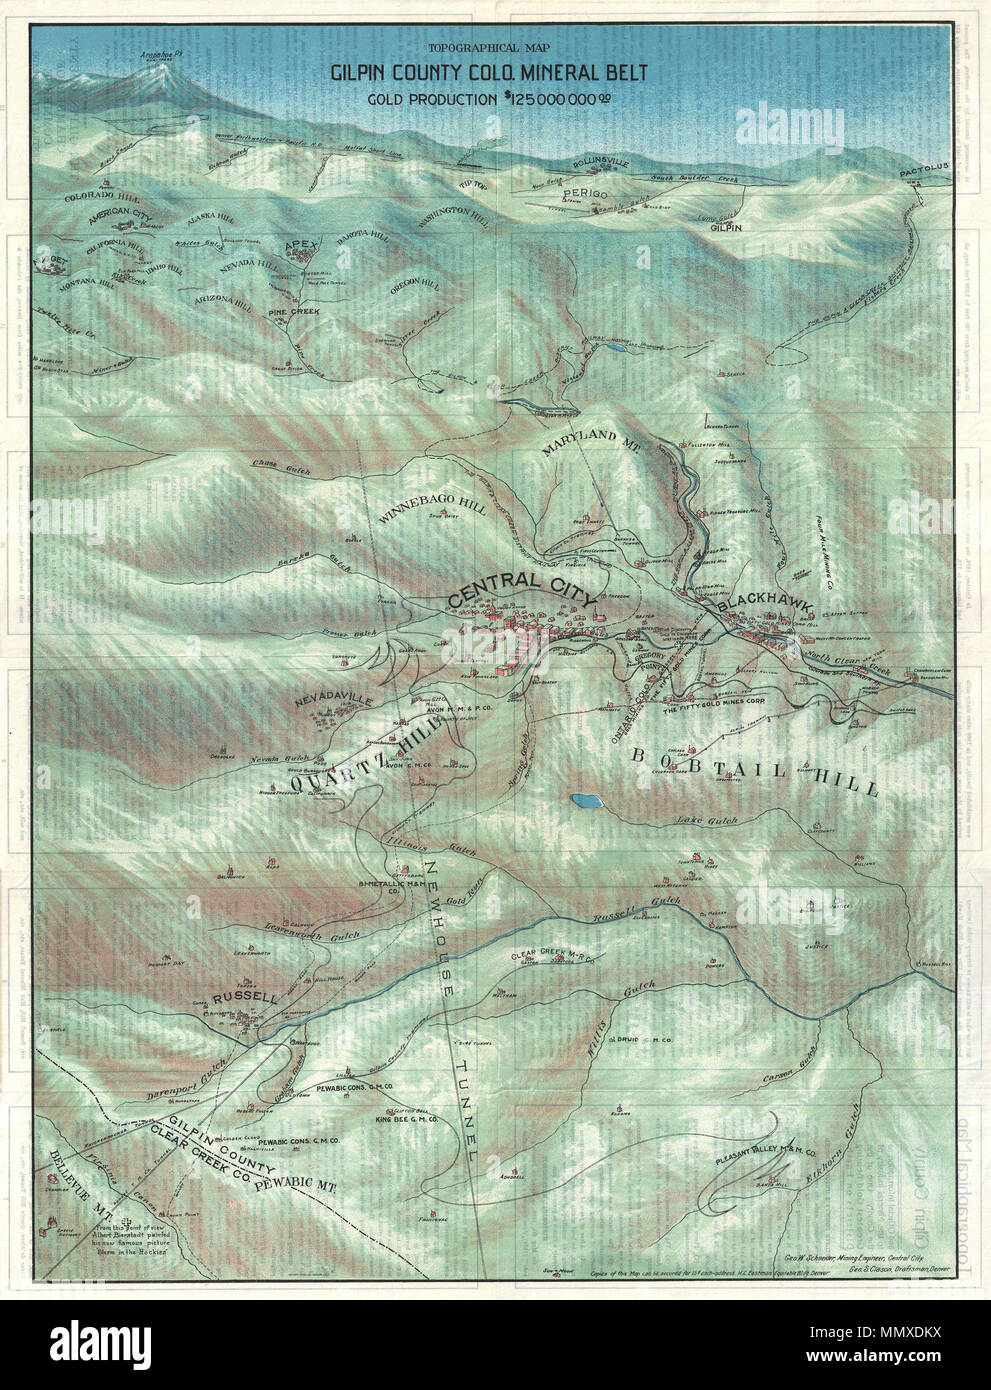 .  English: This is a stunning 1904 broadside bird's eye view or map of Gilpin County, Colorado. Centered on Central City, this view extends as far north as Rollinsville and Arapahoe Peak, as far south as Bellevue Mountain, as far east as Randolph Mill, and west as far as Nugget. In 1859 John H. Gregory discovered gold high in the Rocky Mountains near Denver. The subsequent gold rush was one of the richest in U.S. history and contributed significantly to the settling and development of Colorado in the mid to late 19th century. This stunning view, issued by the Gilpin County Chamber of Commerce Stock Photo